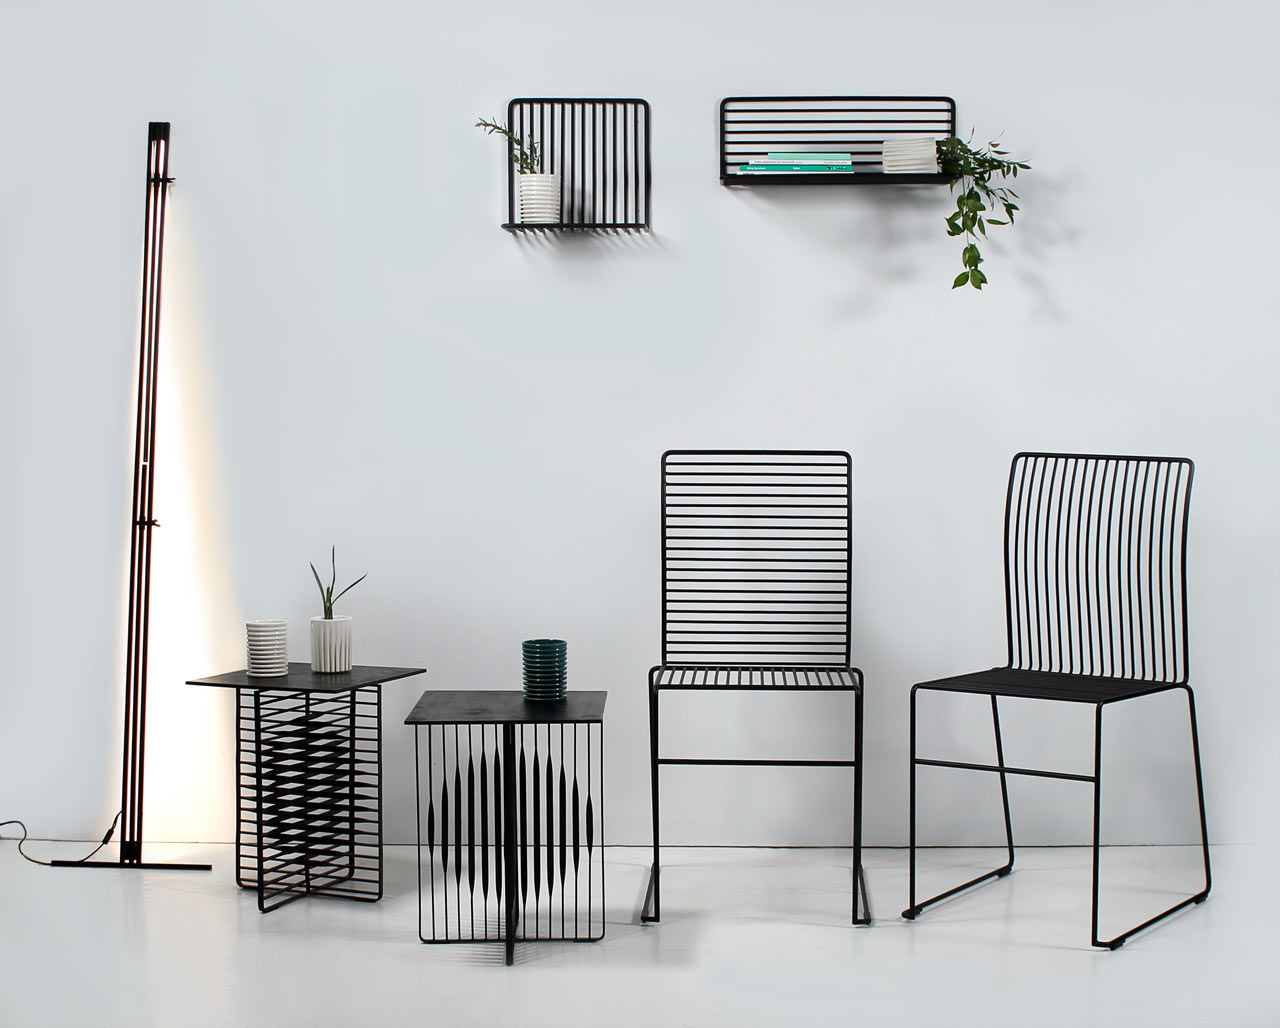 Parallel Universe collection is a series of minimalist furniture that proves that such pieces can be eye catchy